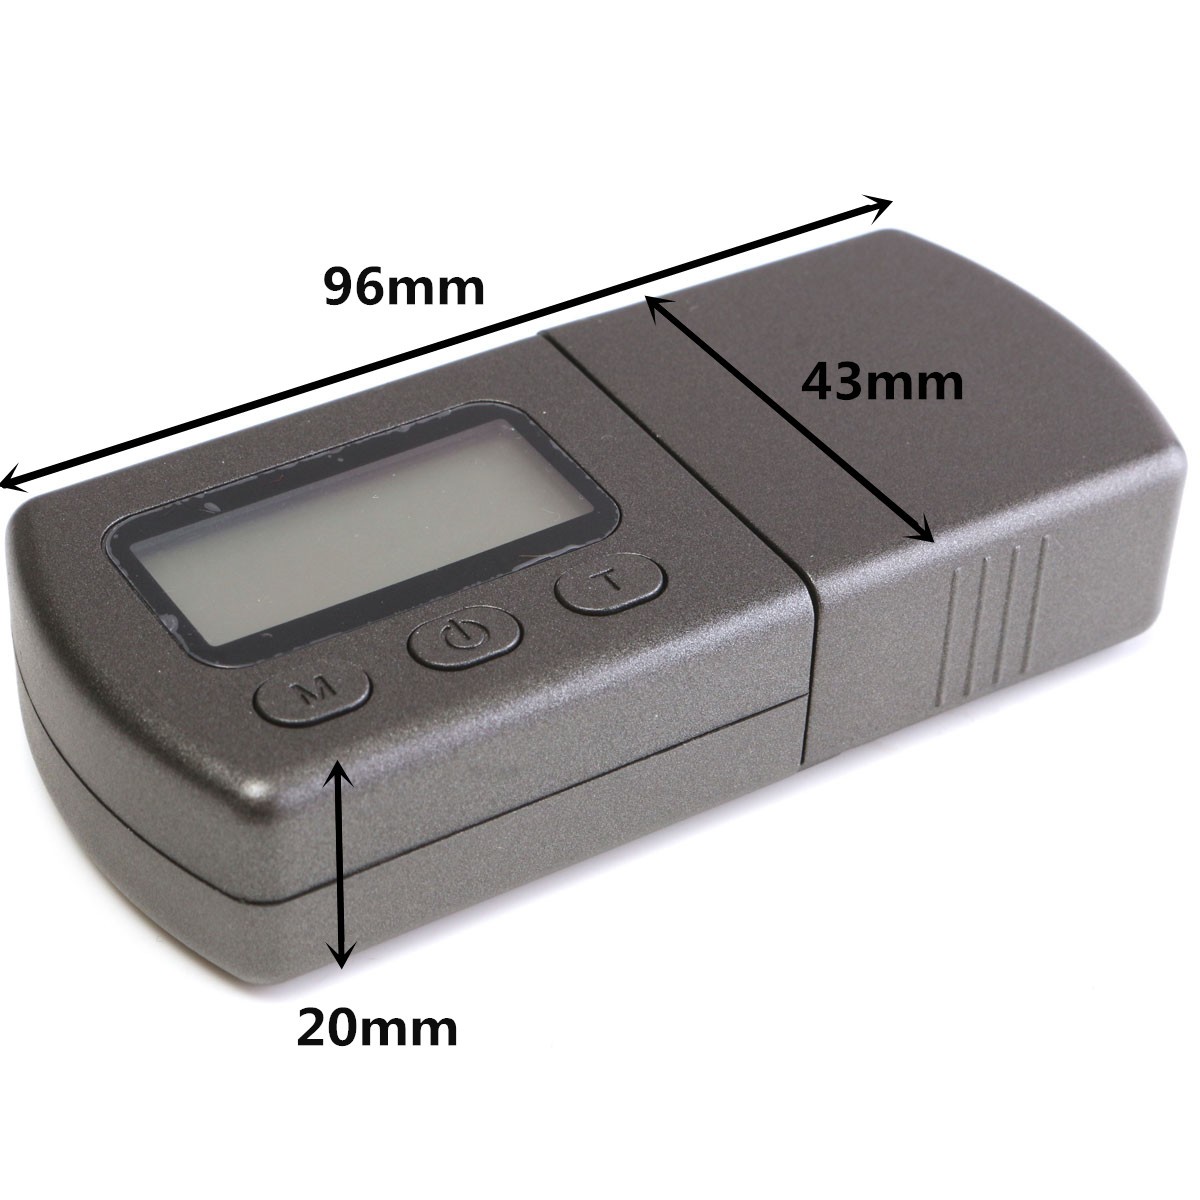 001gx5g-Professional-Digital-Turntable-Stylus-Force-Scale-Gauge-for-Jewelry-1045348